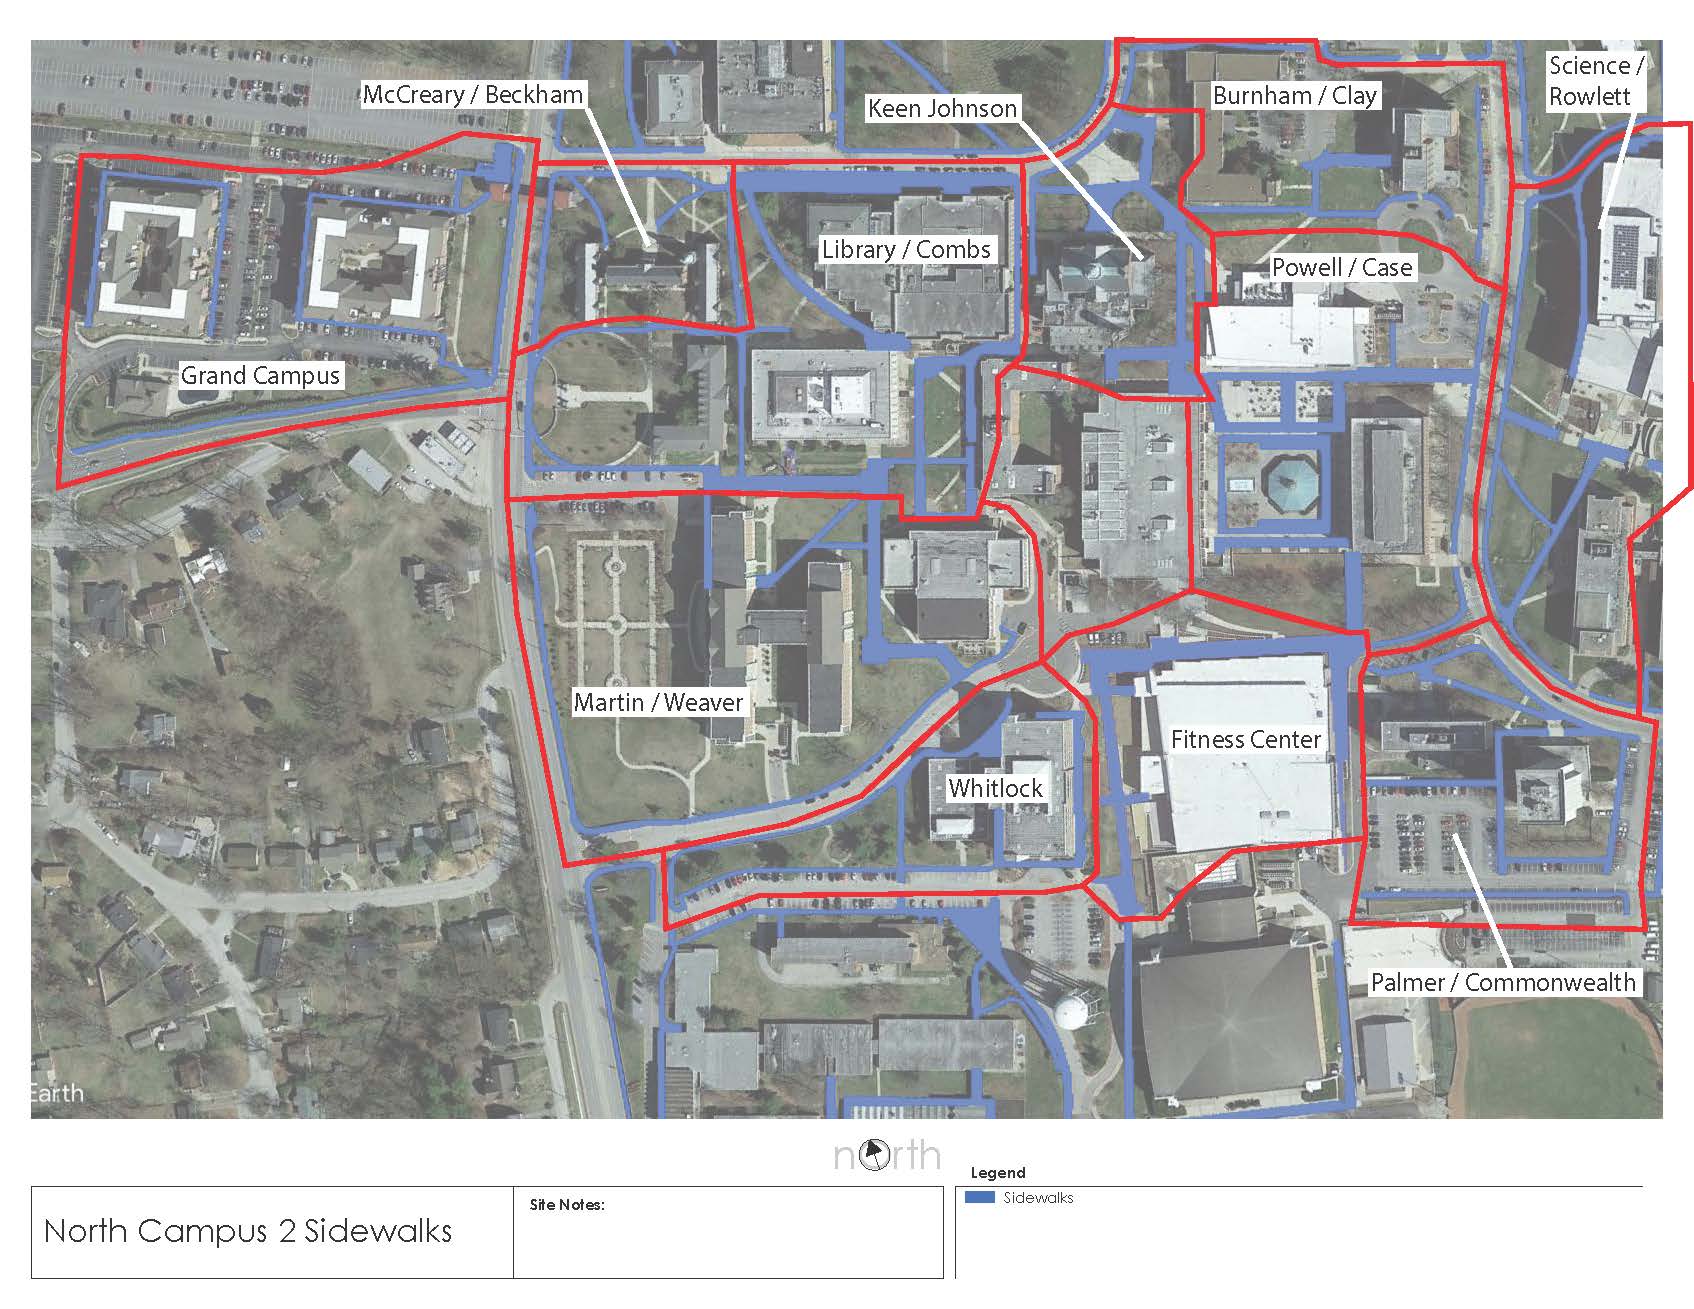 The snow and ice removal plan for North Campus sidewalks at Eastern Kentucky University.